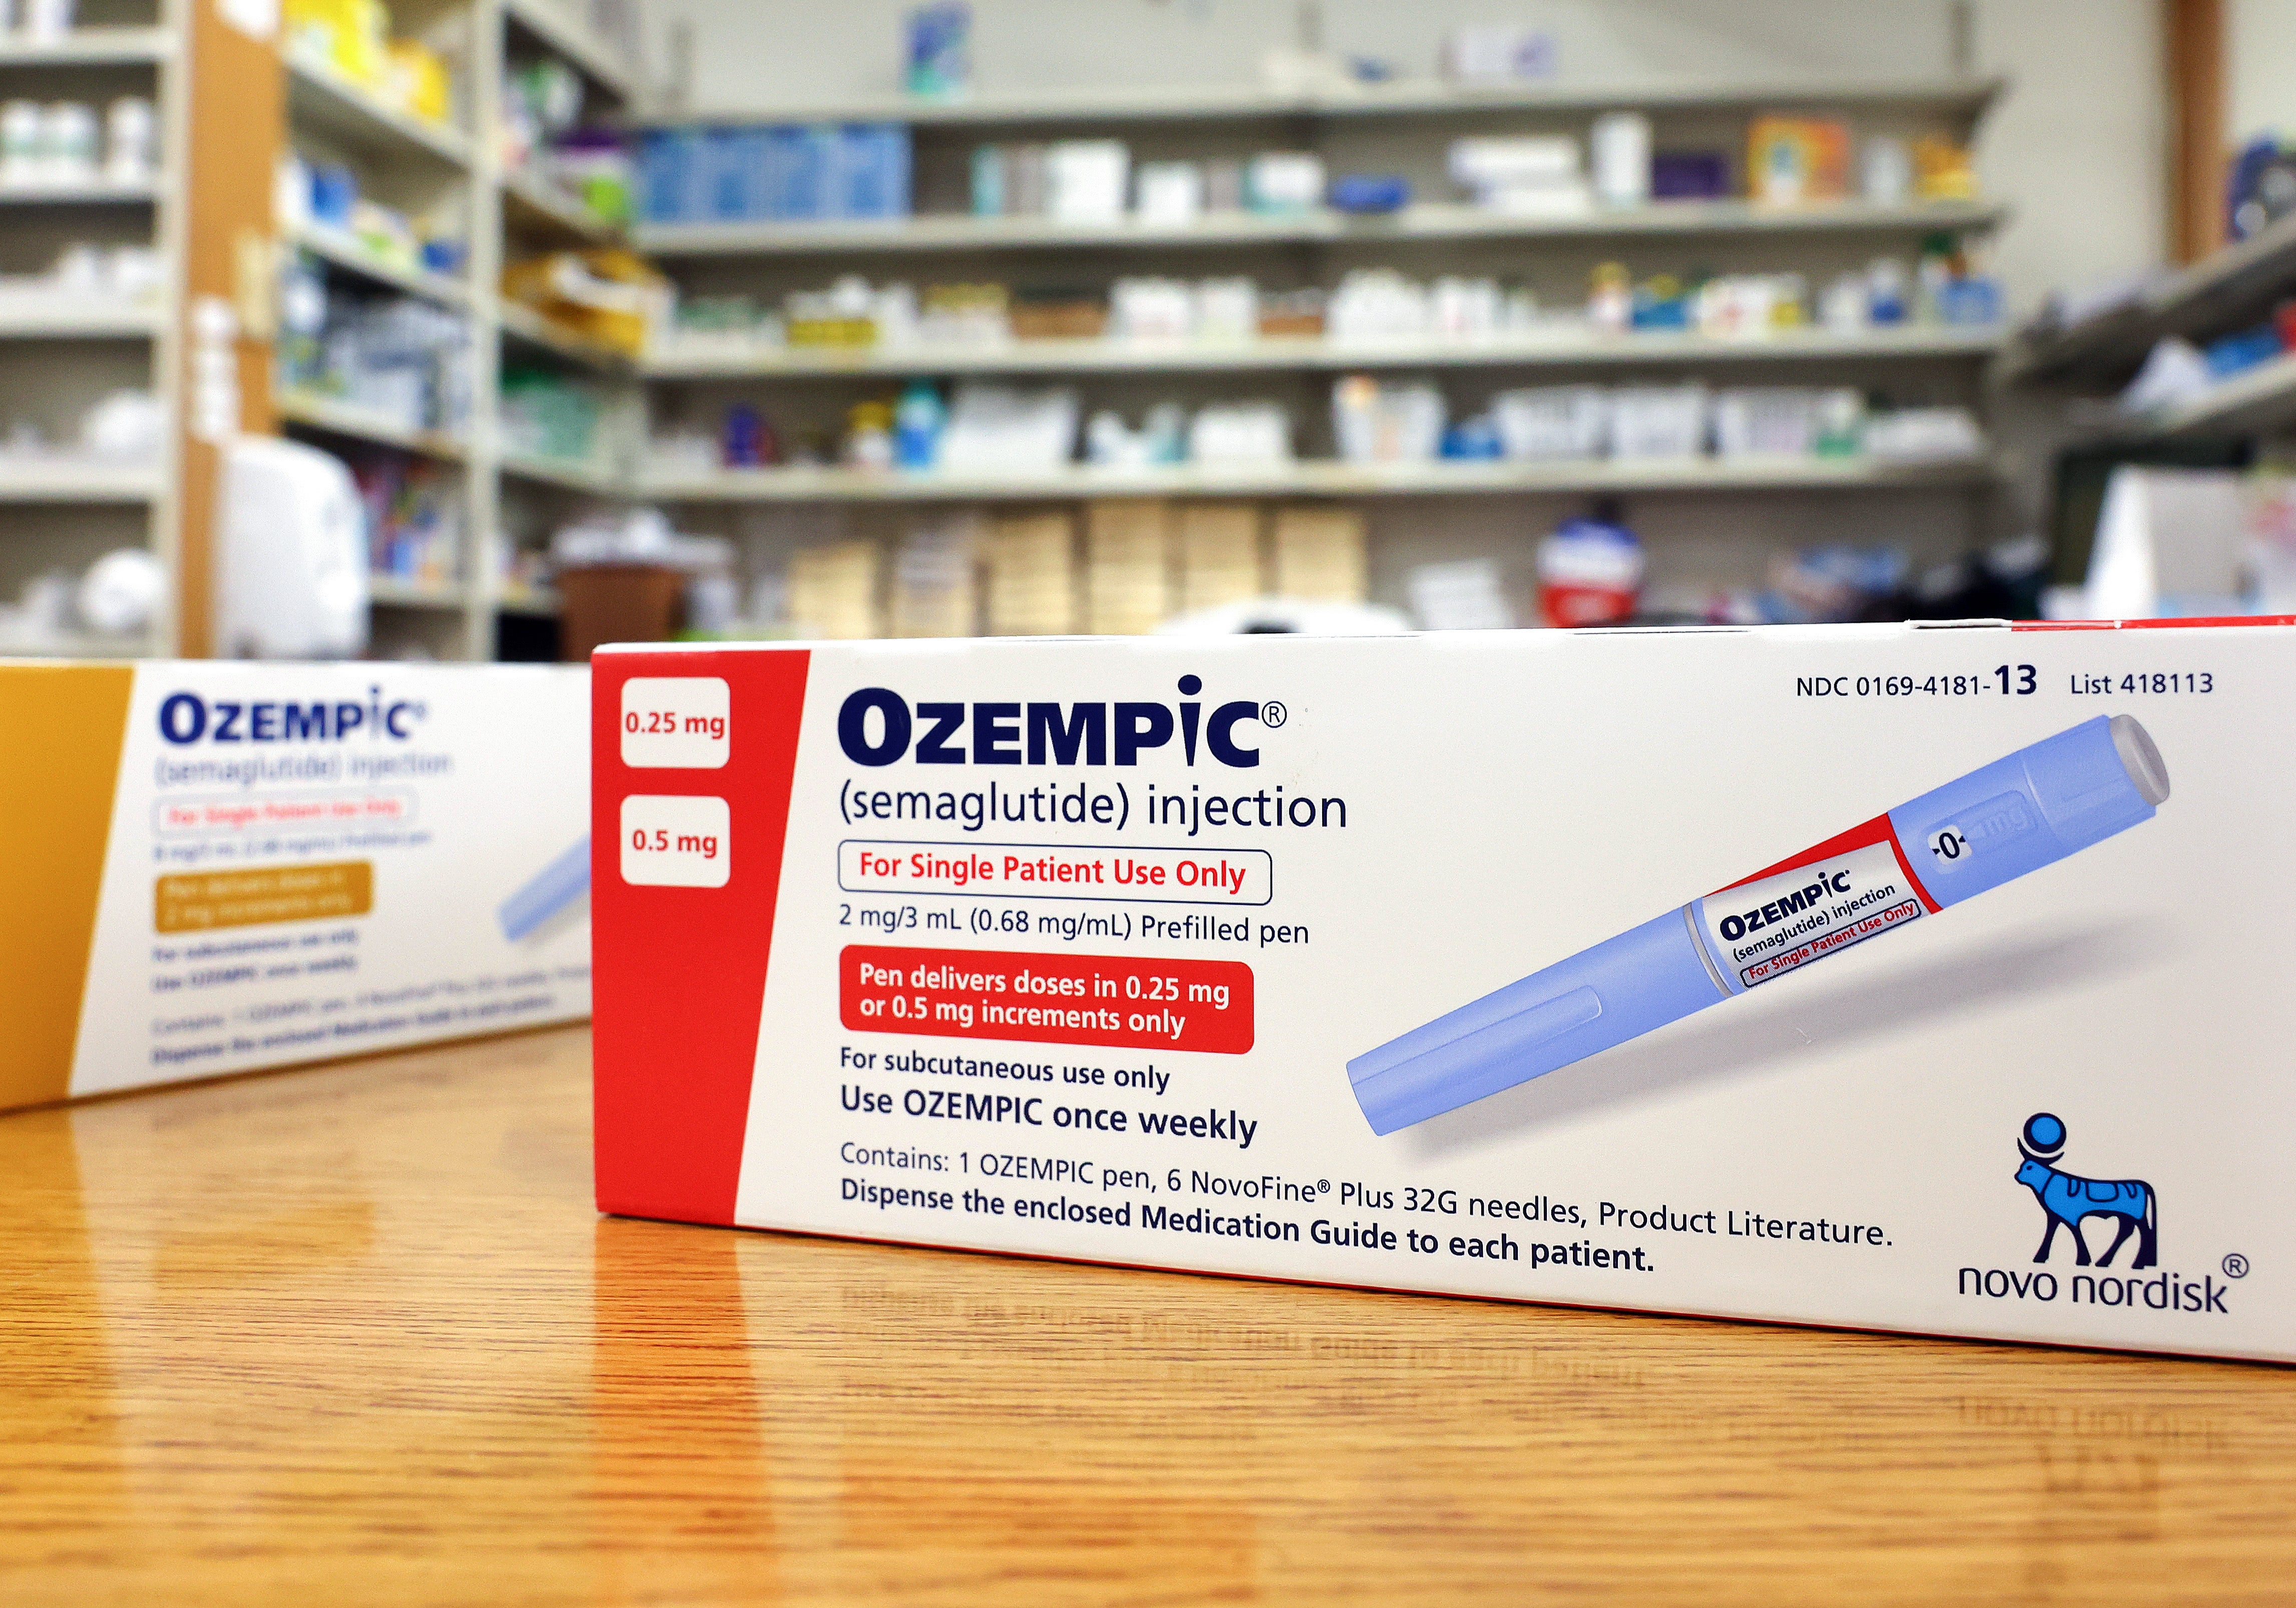 5 Ways Ozempic and Other New Weight-Loss Drugs Have Changed Health